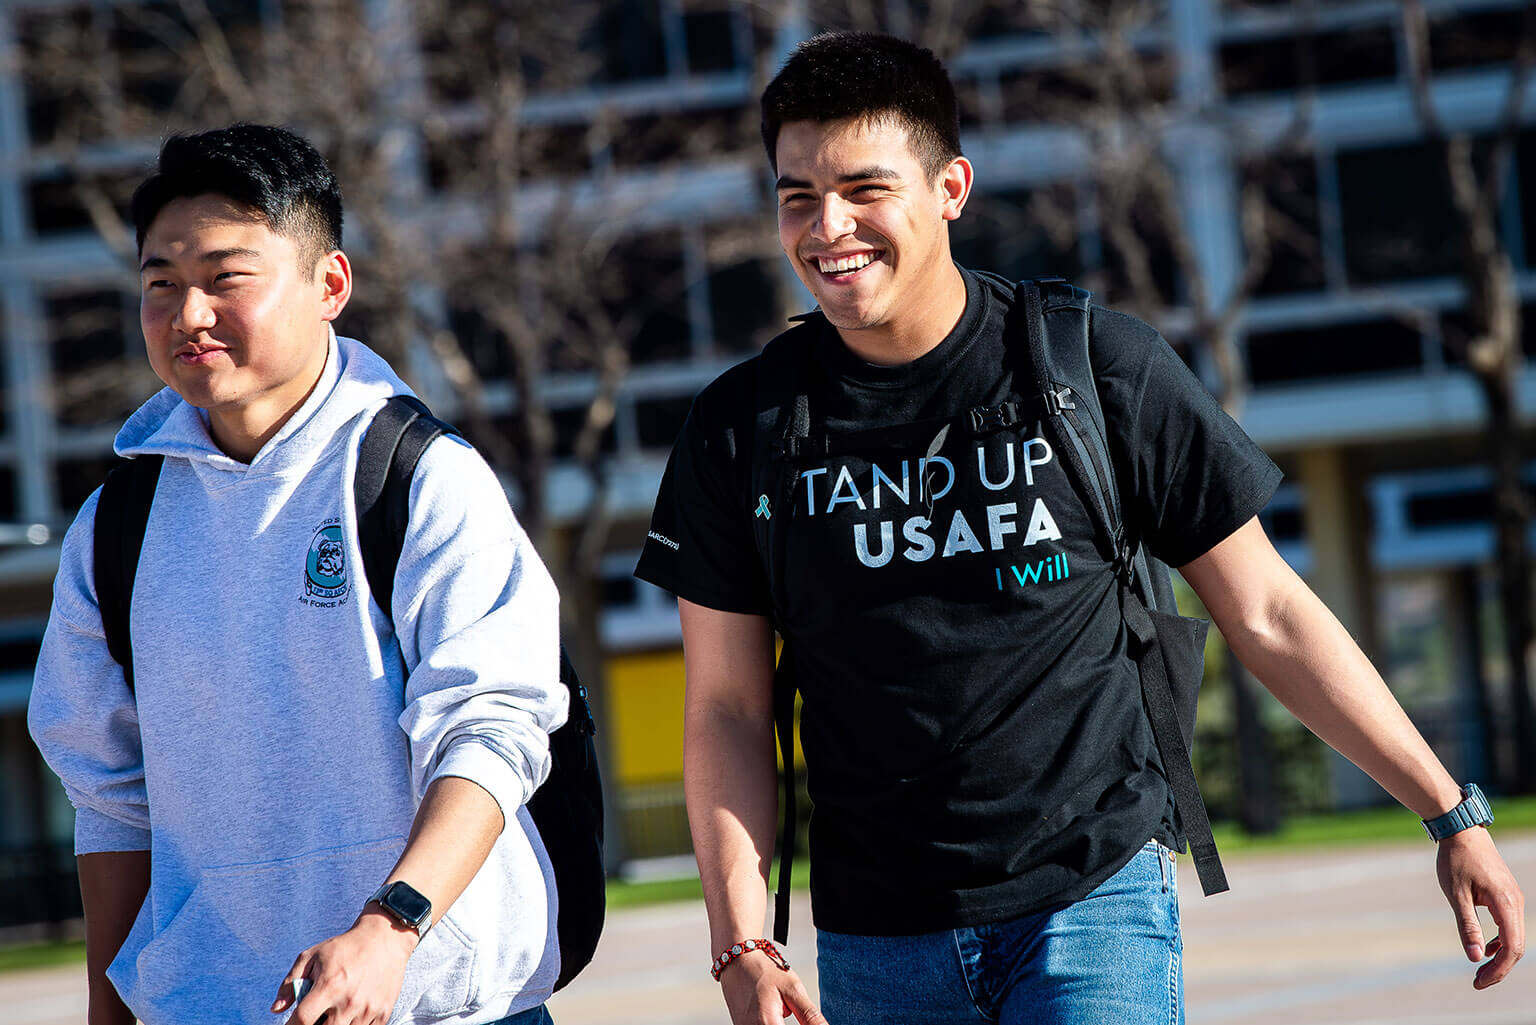 Two cadets sport their denim and U.S. Air Force Academy “Stand Up USAFA” T-shirts walk on the Terrazzo between classes.